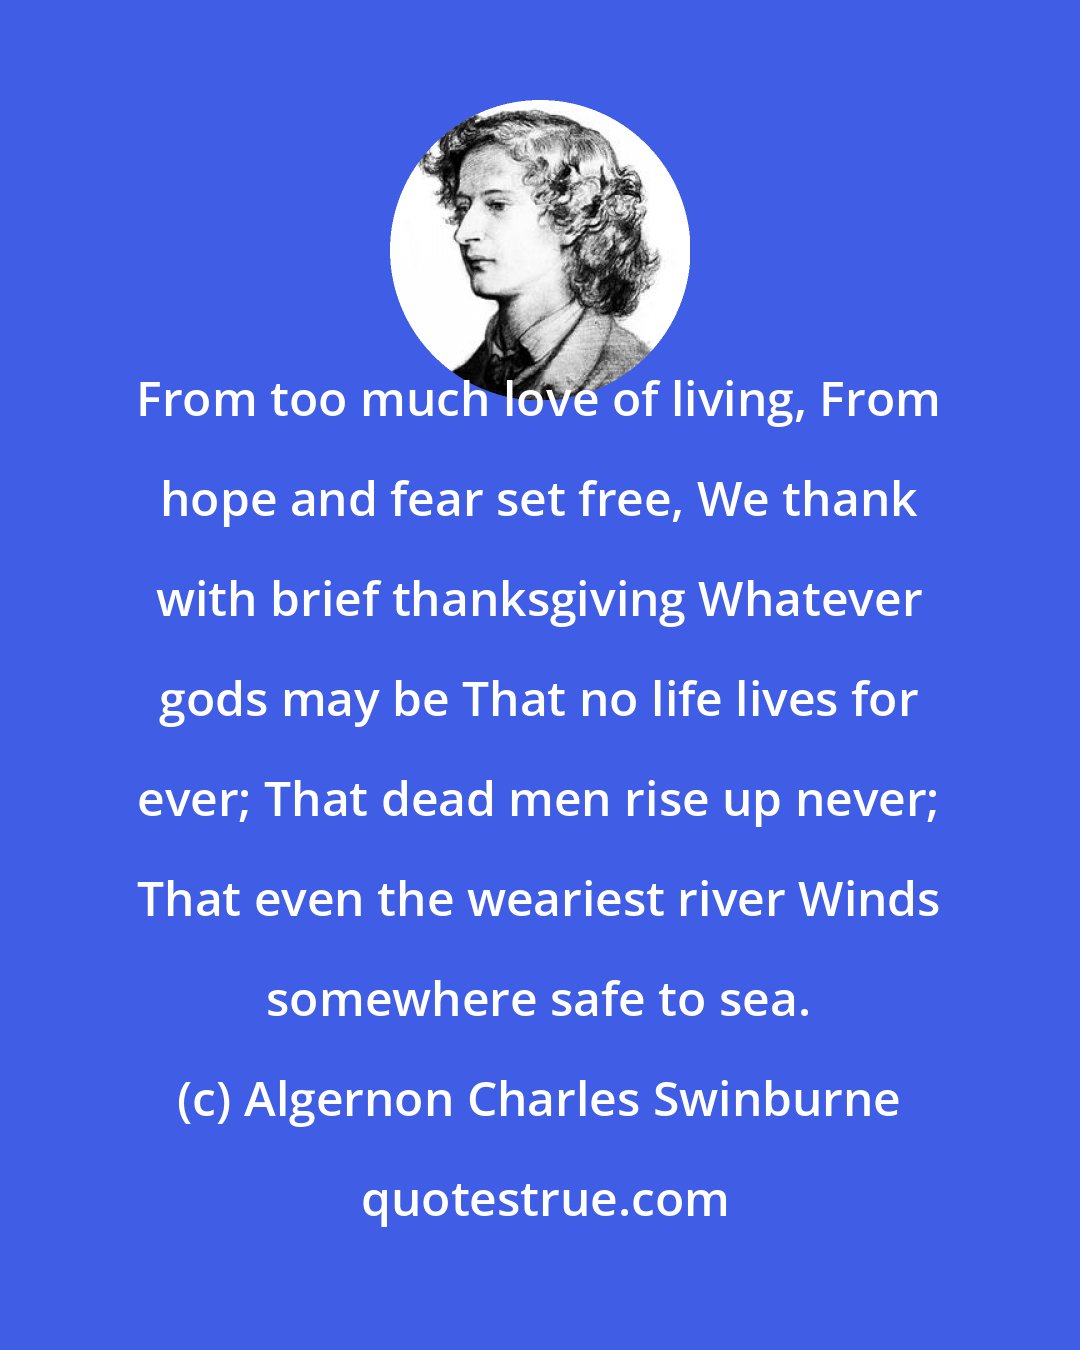 Algernon Charles Swinburne: From too much love of living, From hope and fear set free, We thank with brief thanksgiving Whatever gods may be That no life lives for ever; That dead men rise up never; That even the weariest river Winds somewhere safe to sea.